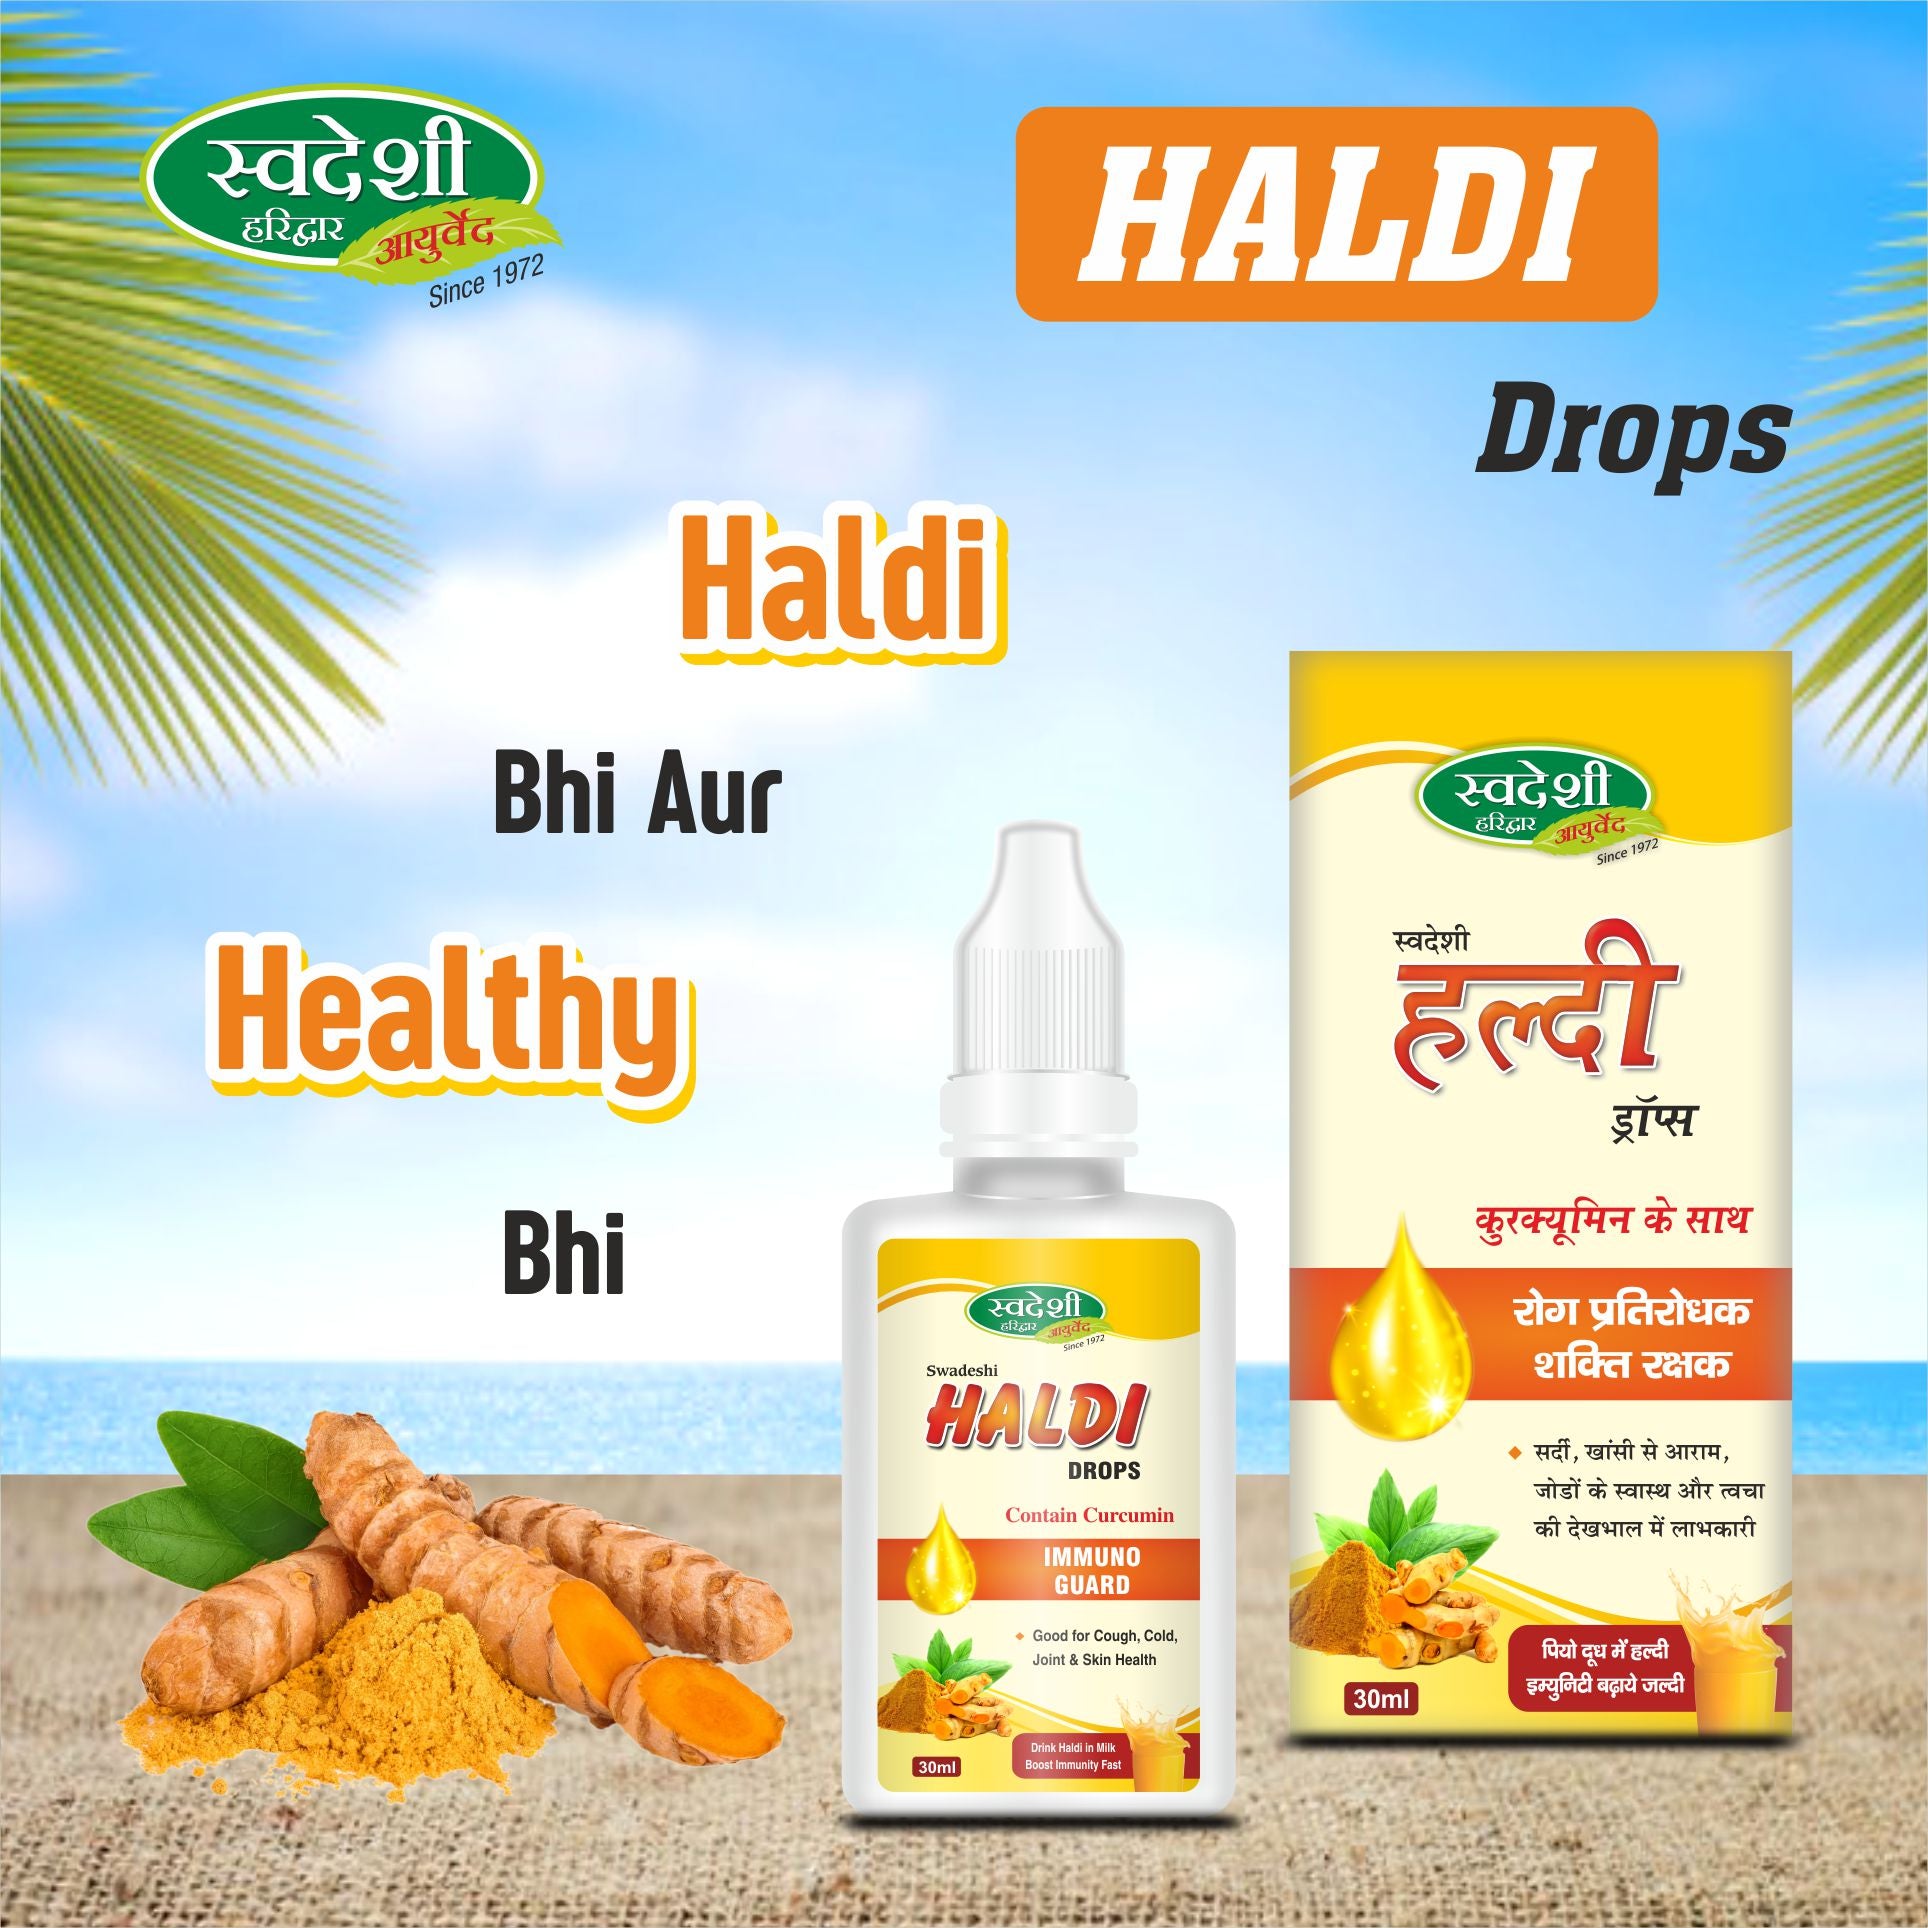 Package design of Swadeshi Haldi Drop. A sleek and professional bottle with a dropper, displaying the key benefits and ingredients.